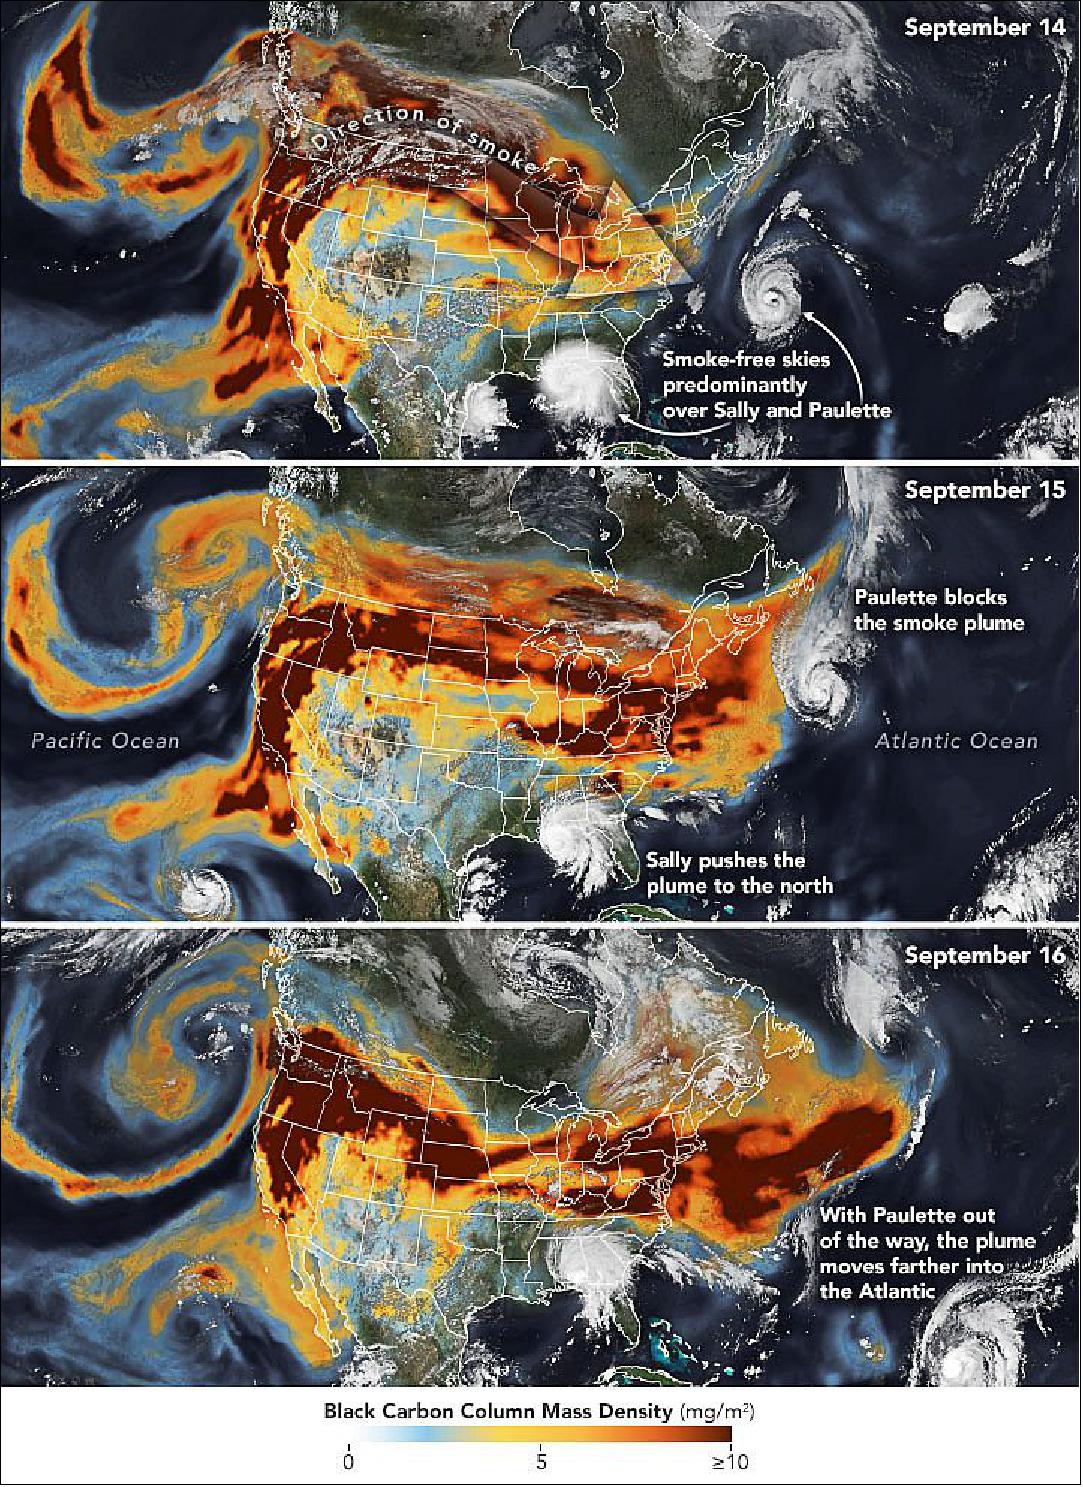 Figure 7: Satellites tracked smoke from wildfires as it spanned the continental United States and followed winds around two hurricanes. As Hurricane Paulette churned in the Atlantic Ocean on September 14, the storm’s circulating winds likely helped keep the skies around the storm mostly clear. By September 15, the smoke had begun to encounter the outer edge of Paulette, whose presence helped steer smoke around the northwestern side of the storm. By September 16, the remnants of Paulette had moved northeast, closer to Newfoundland, clearing the way for the smoke plume to extend eastward unimpeded (image credit: NASA Earth Observatory, images by Joshua Stevens, using GEOS-5 data from the Global Modeling and Assimilation Office at NASA GSFC and VIIRS data from NASA EOSDIS/LANCE and GIBS/Worldview and the Suomi NPP. Story by Adam Voiland)